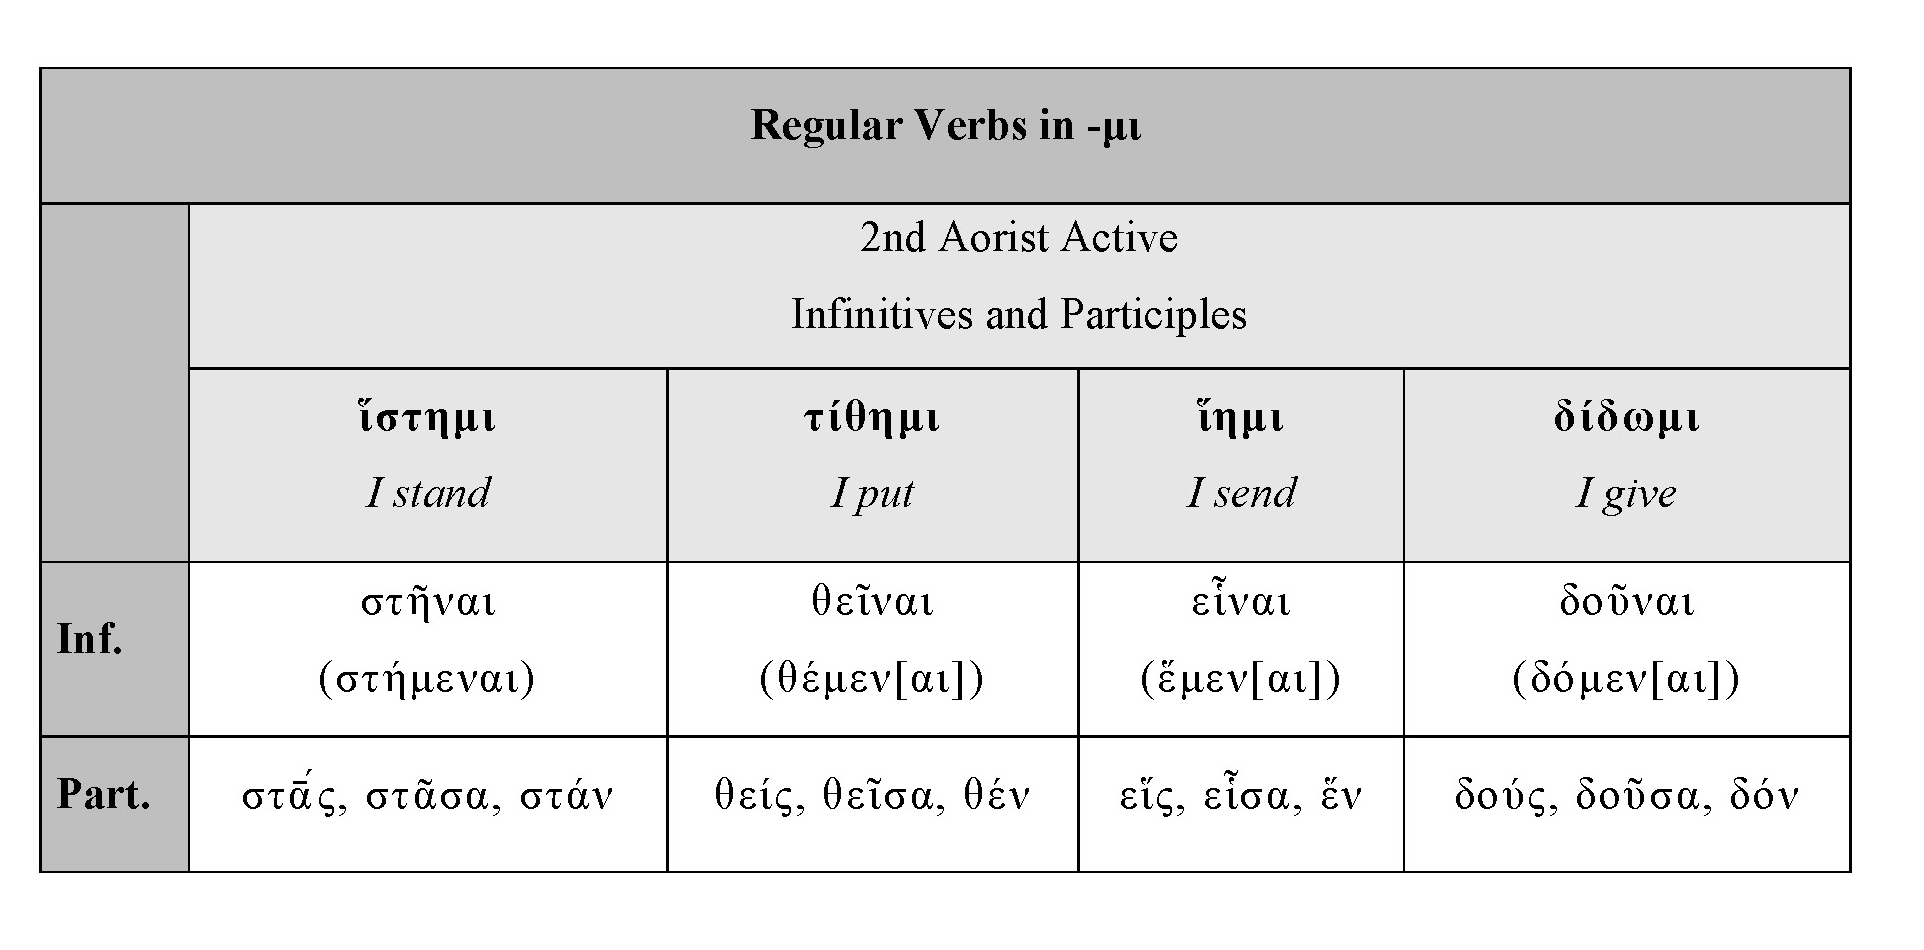 HOMERIC VERBS: -ΜΙ 2ND AORIST ACTIVE INFINITIVES AND PARTICIPLES